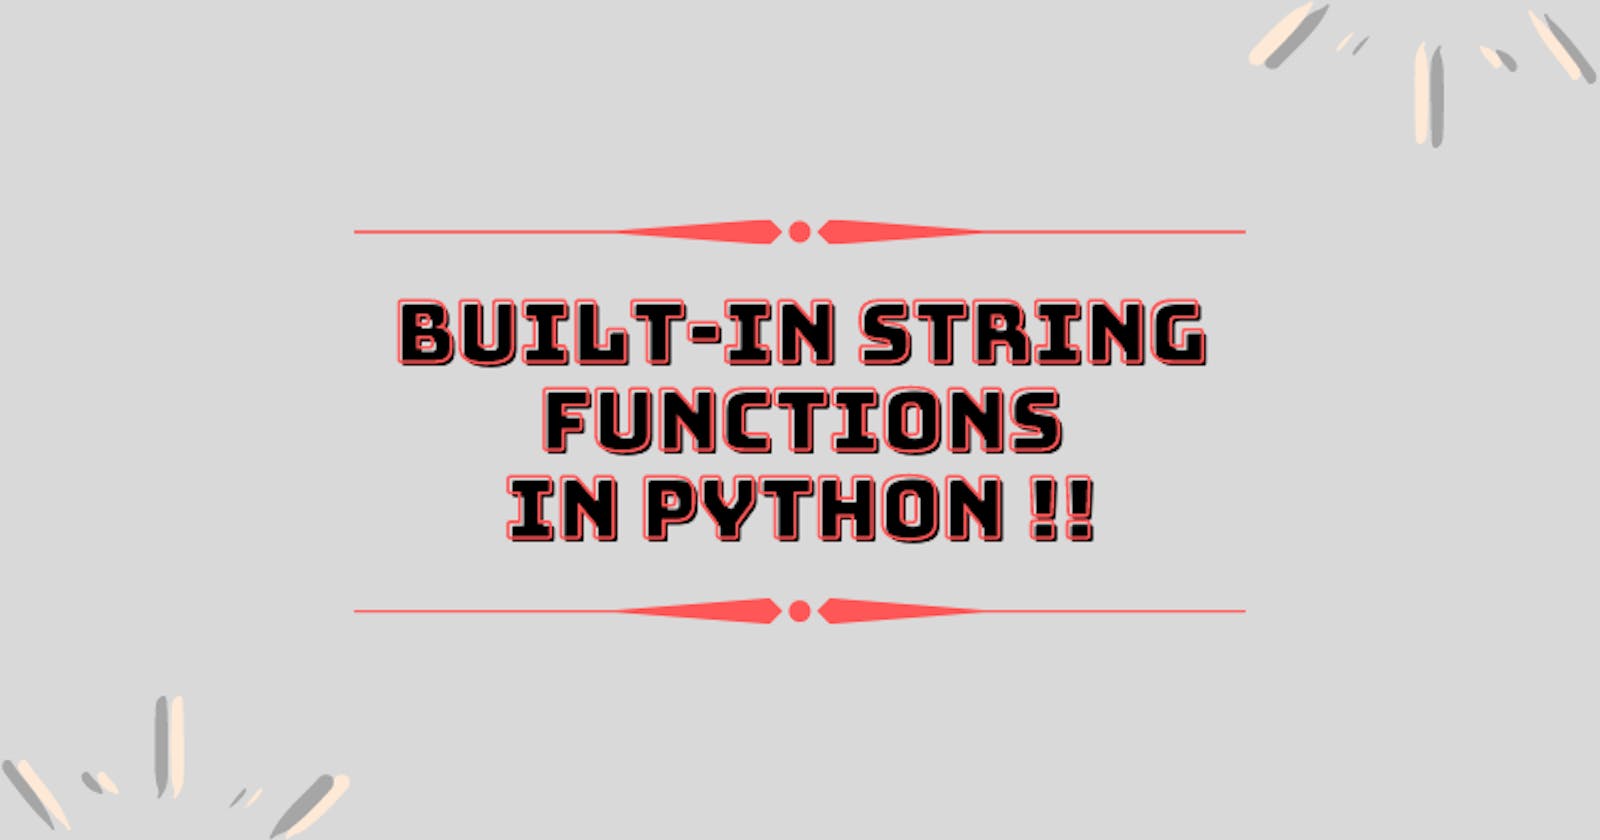 Built-in string functions in python